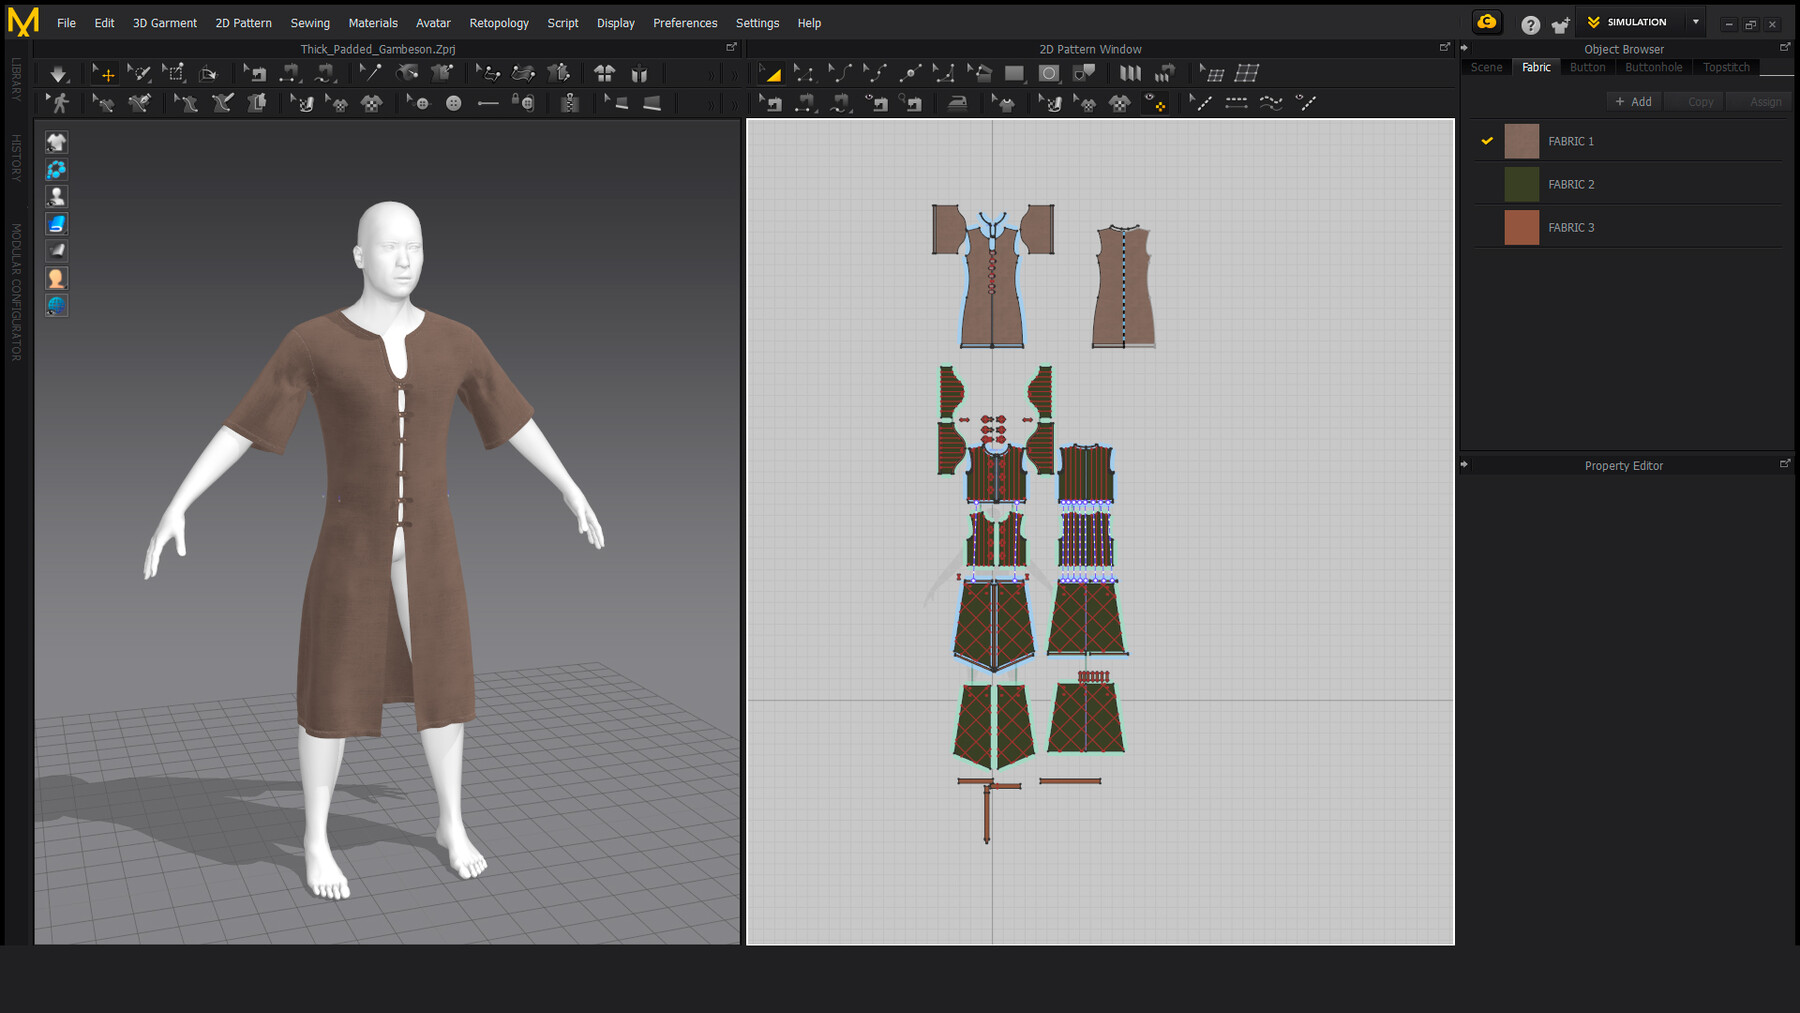 Thick Padded Medieval Gambeson. Marvelous designer and Clo3D. Zprj/OBJ